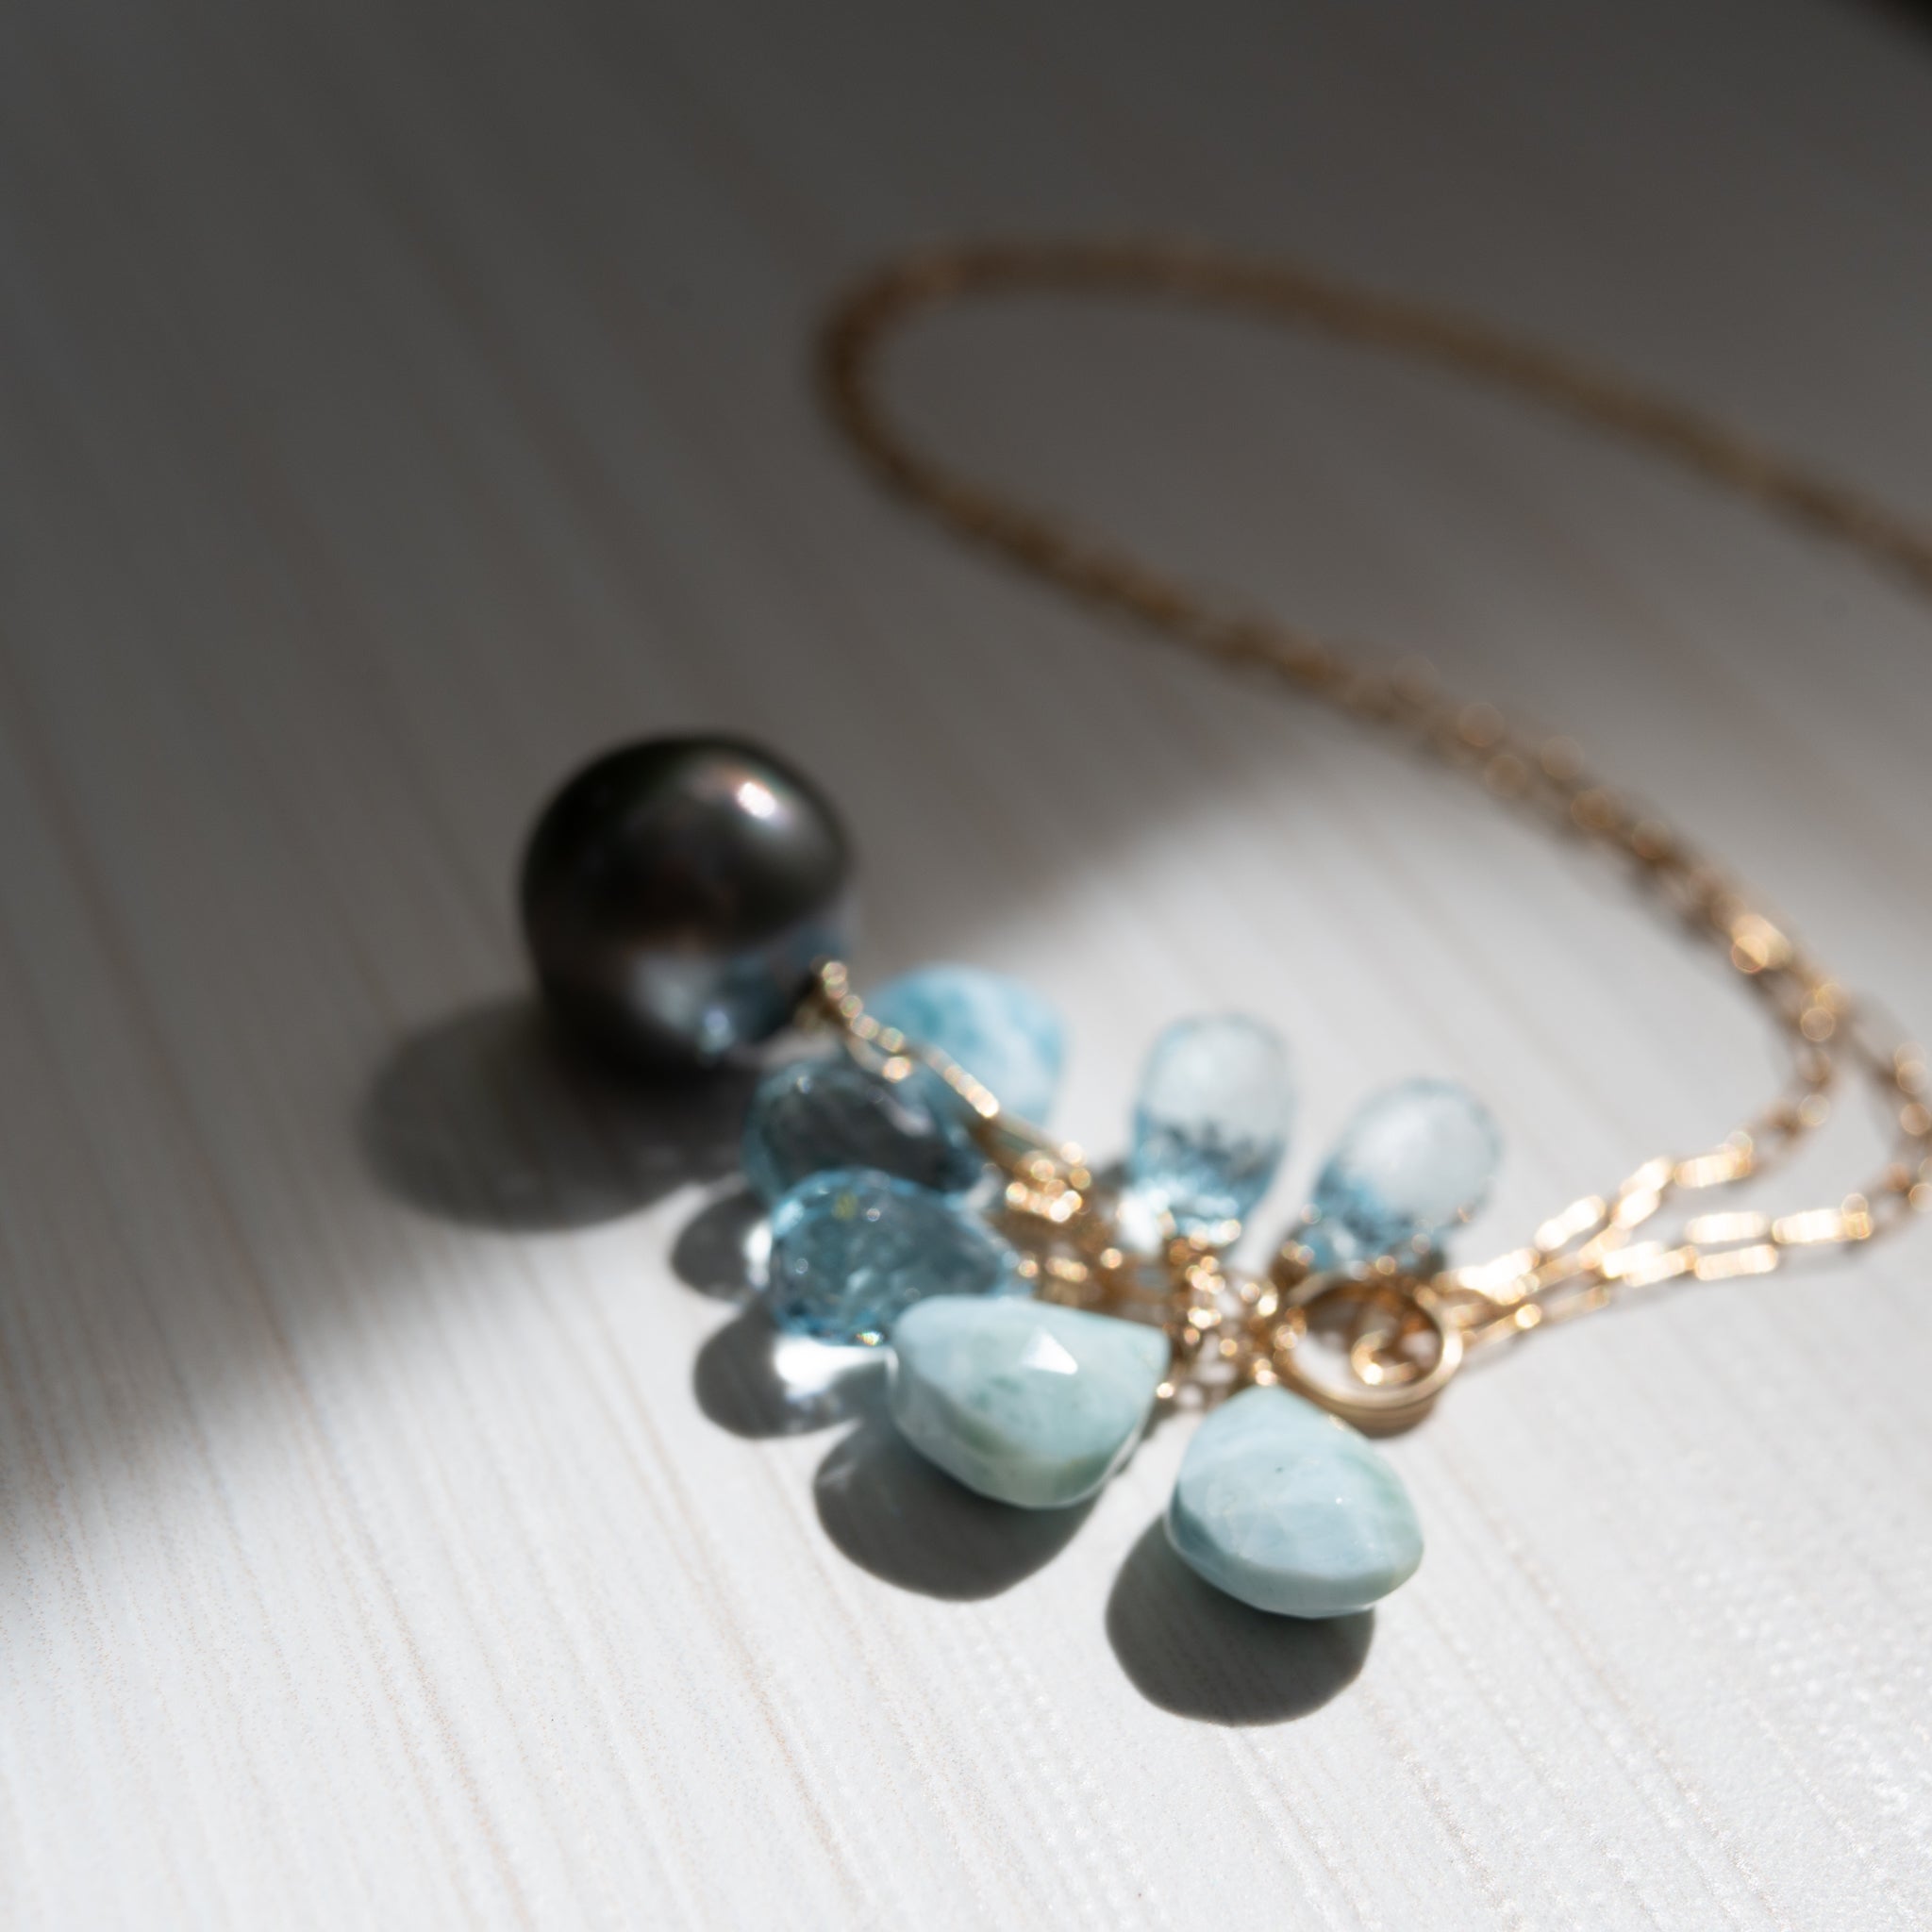 tahitian pearl and larimar necklace , handmade in Hawaii by eve black jewelry  